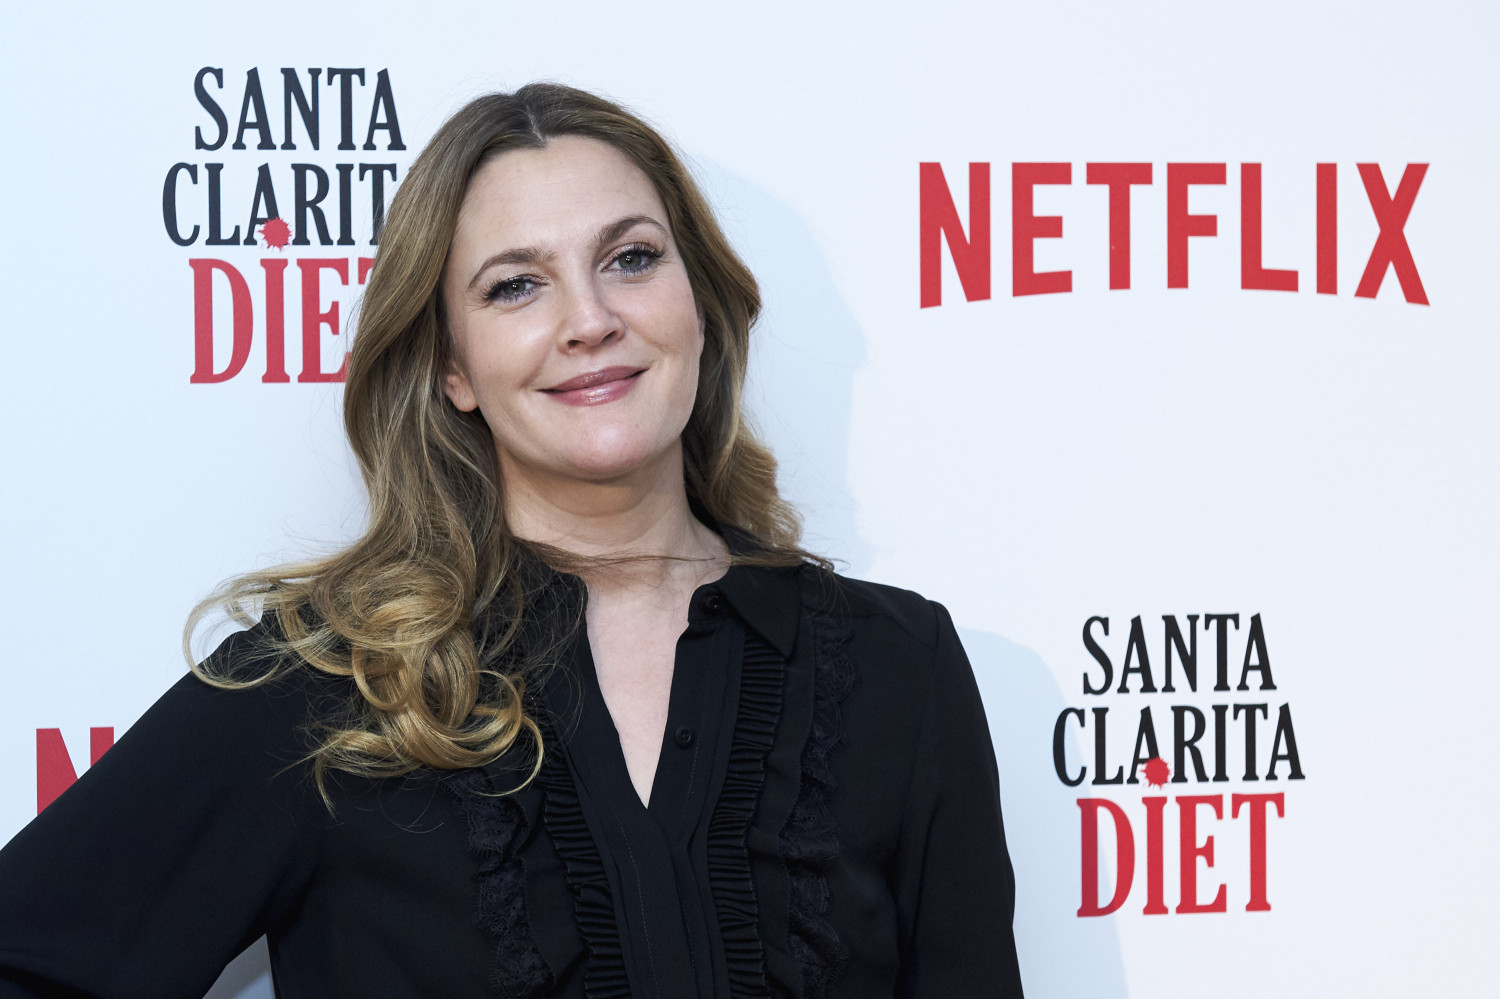 Drew Barrymore Opens Up About Her Dieting Struggles After 25-pound Weight Loss